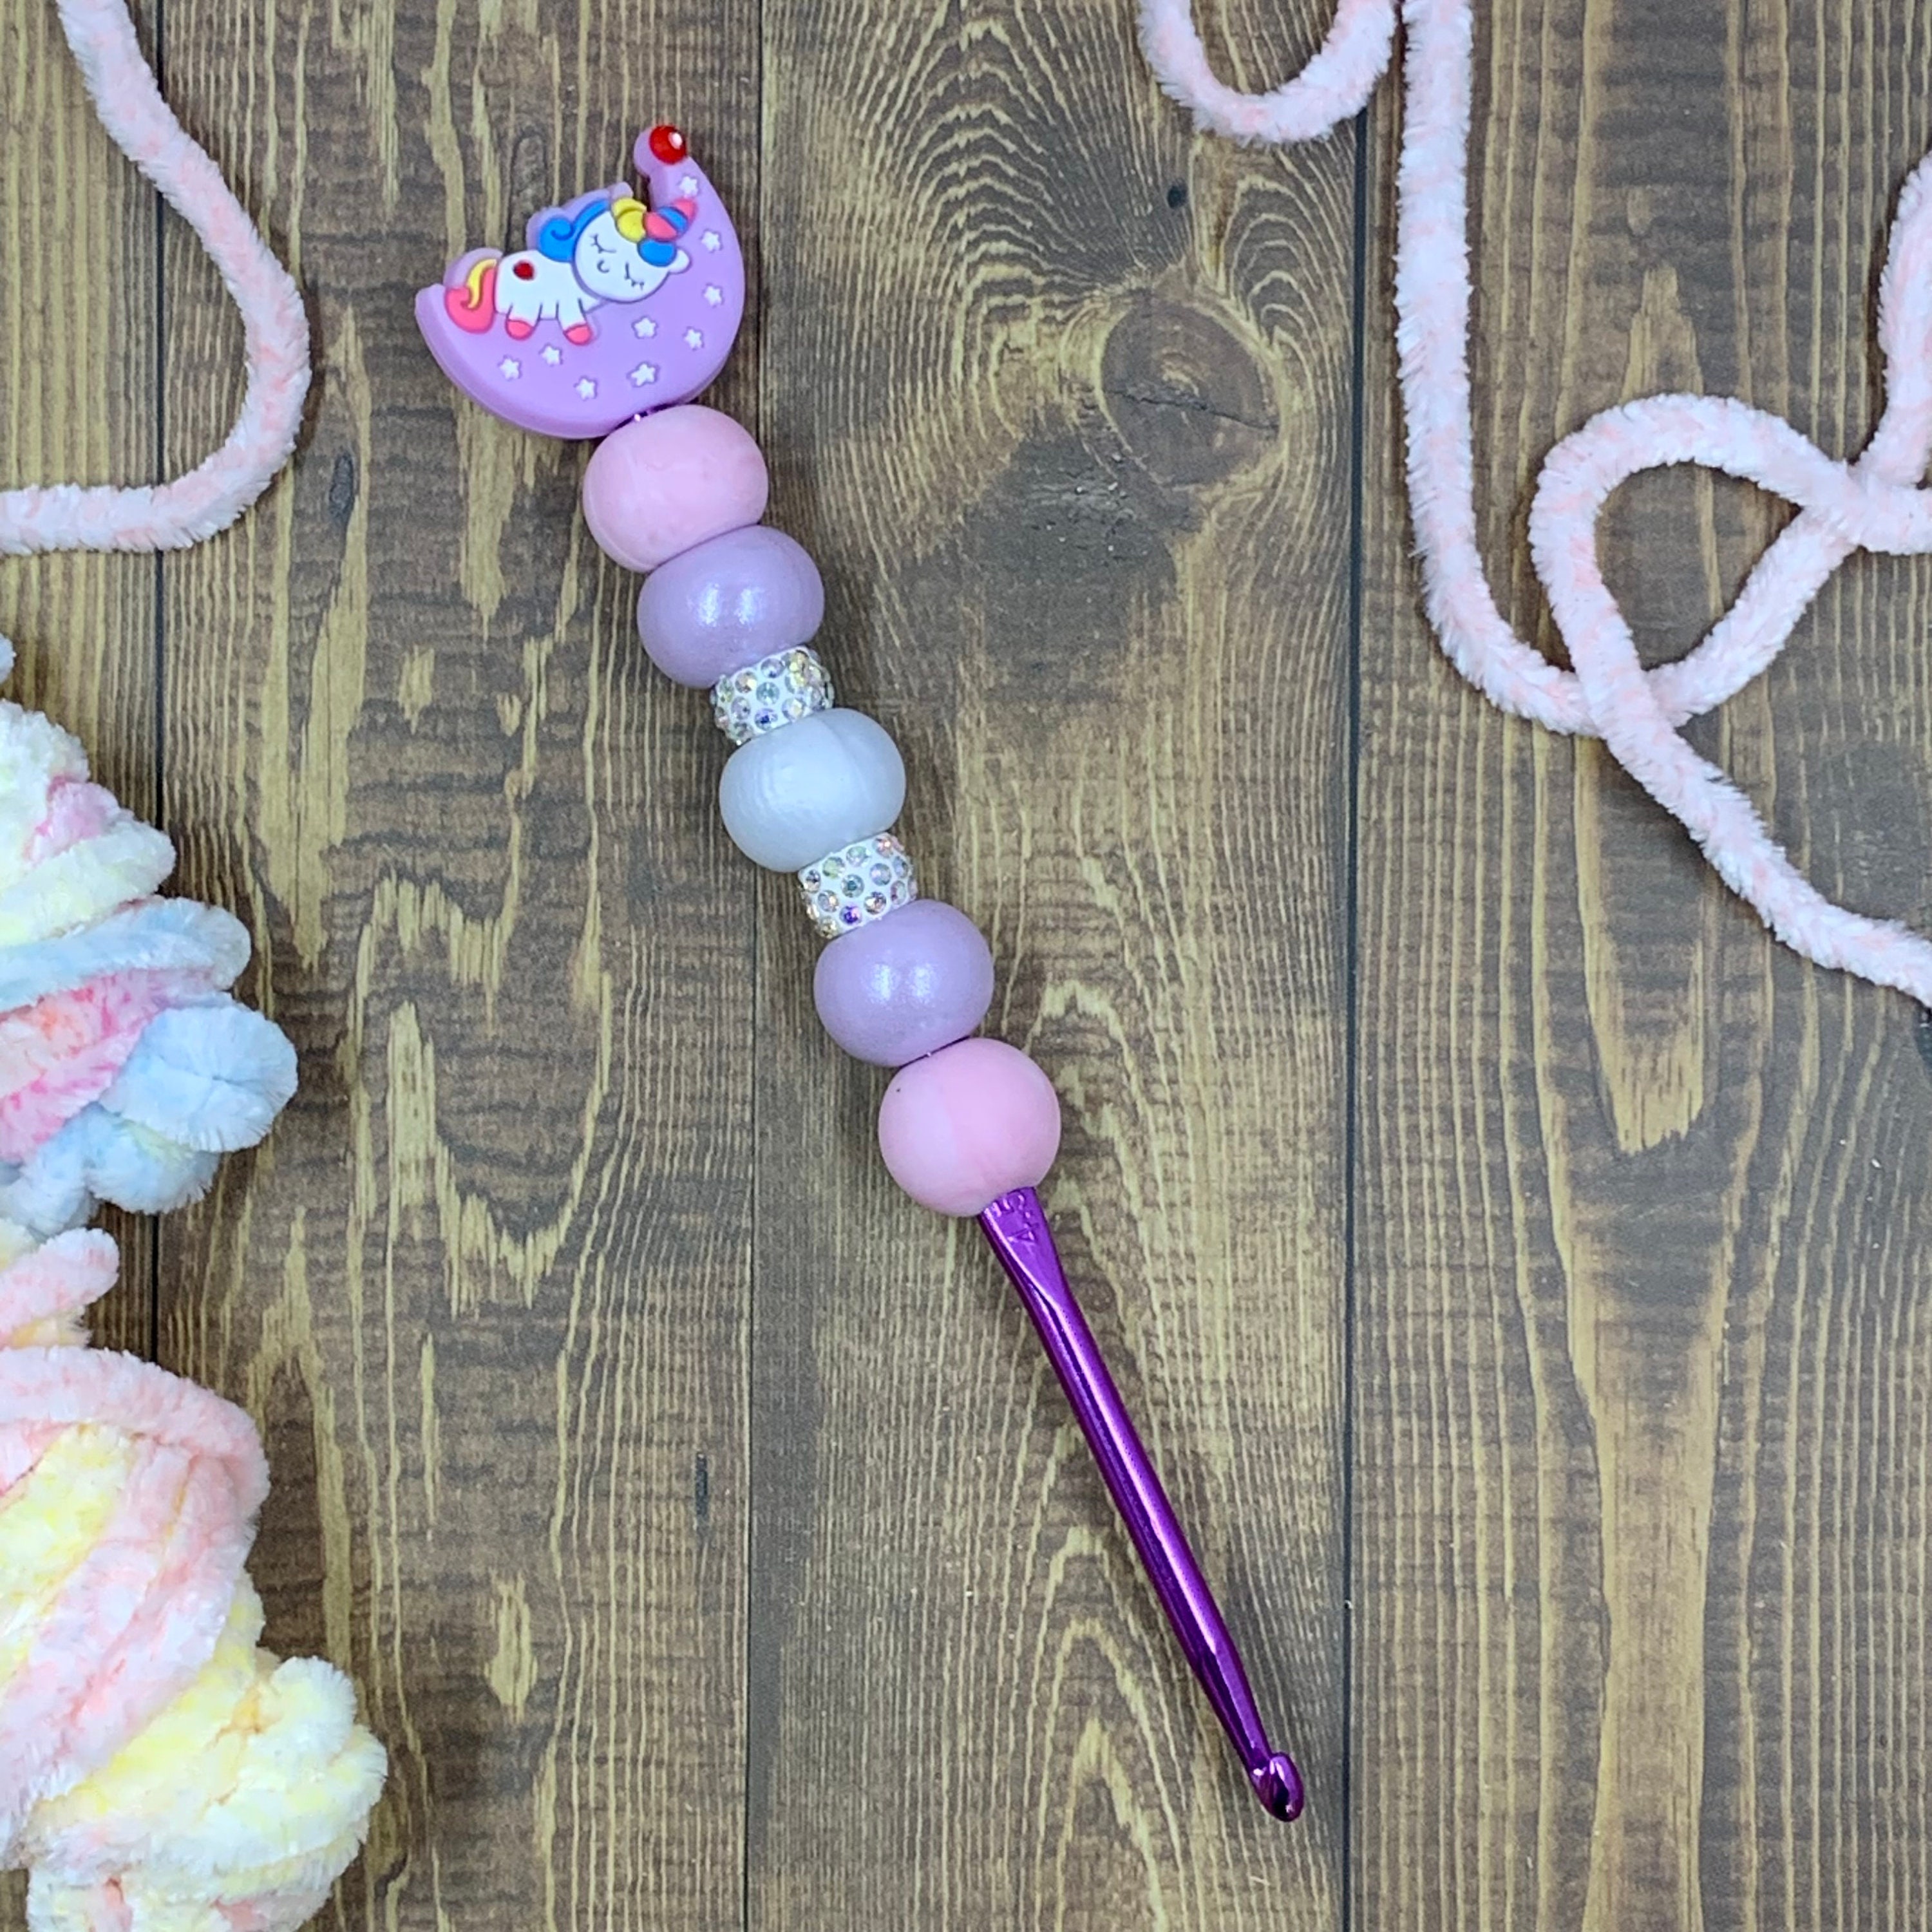 Beaded Ergonomic Crochet Hook With Silicone Beads and a Silicone Focal Bead.  This is an 8mm Size or an L Crochet Hook. 